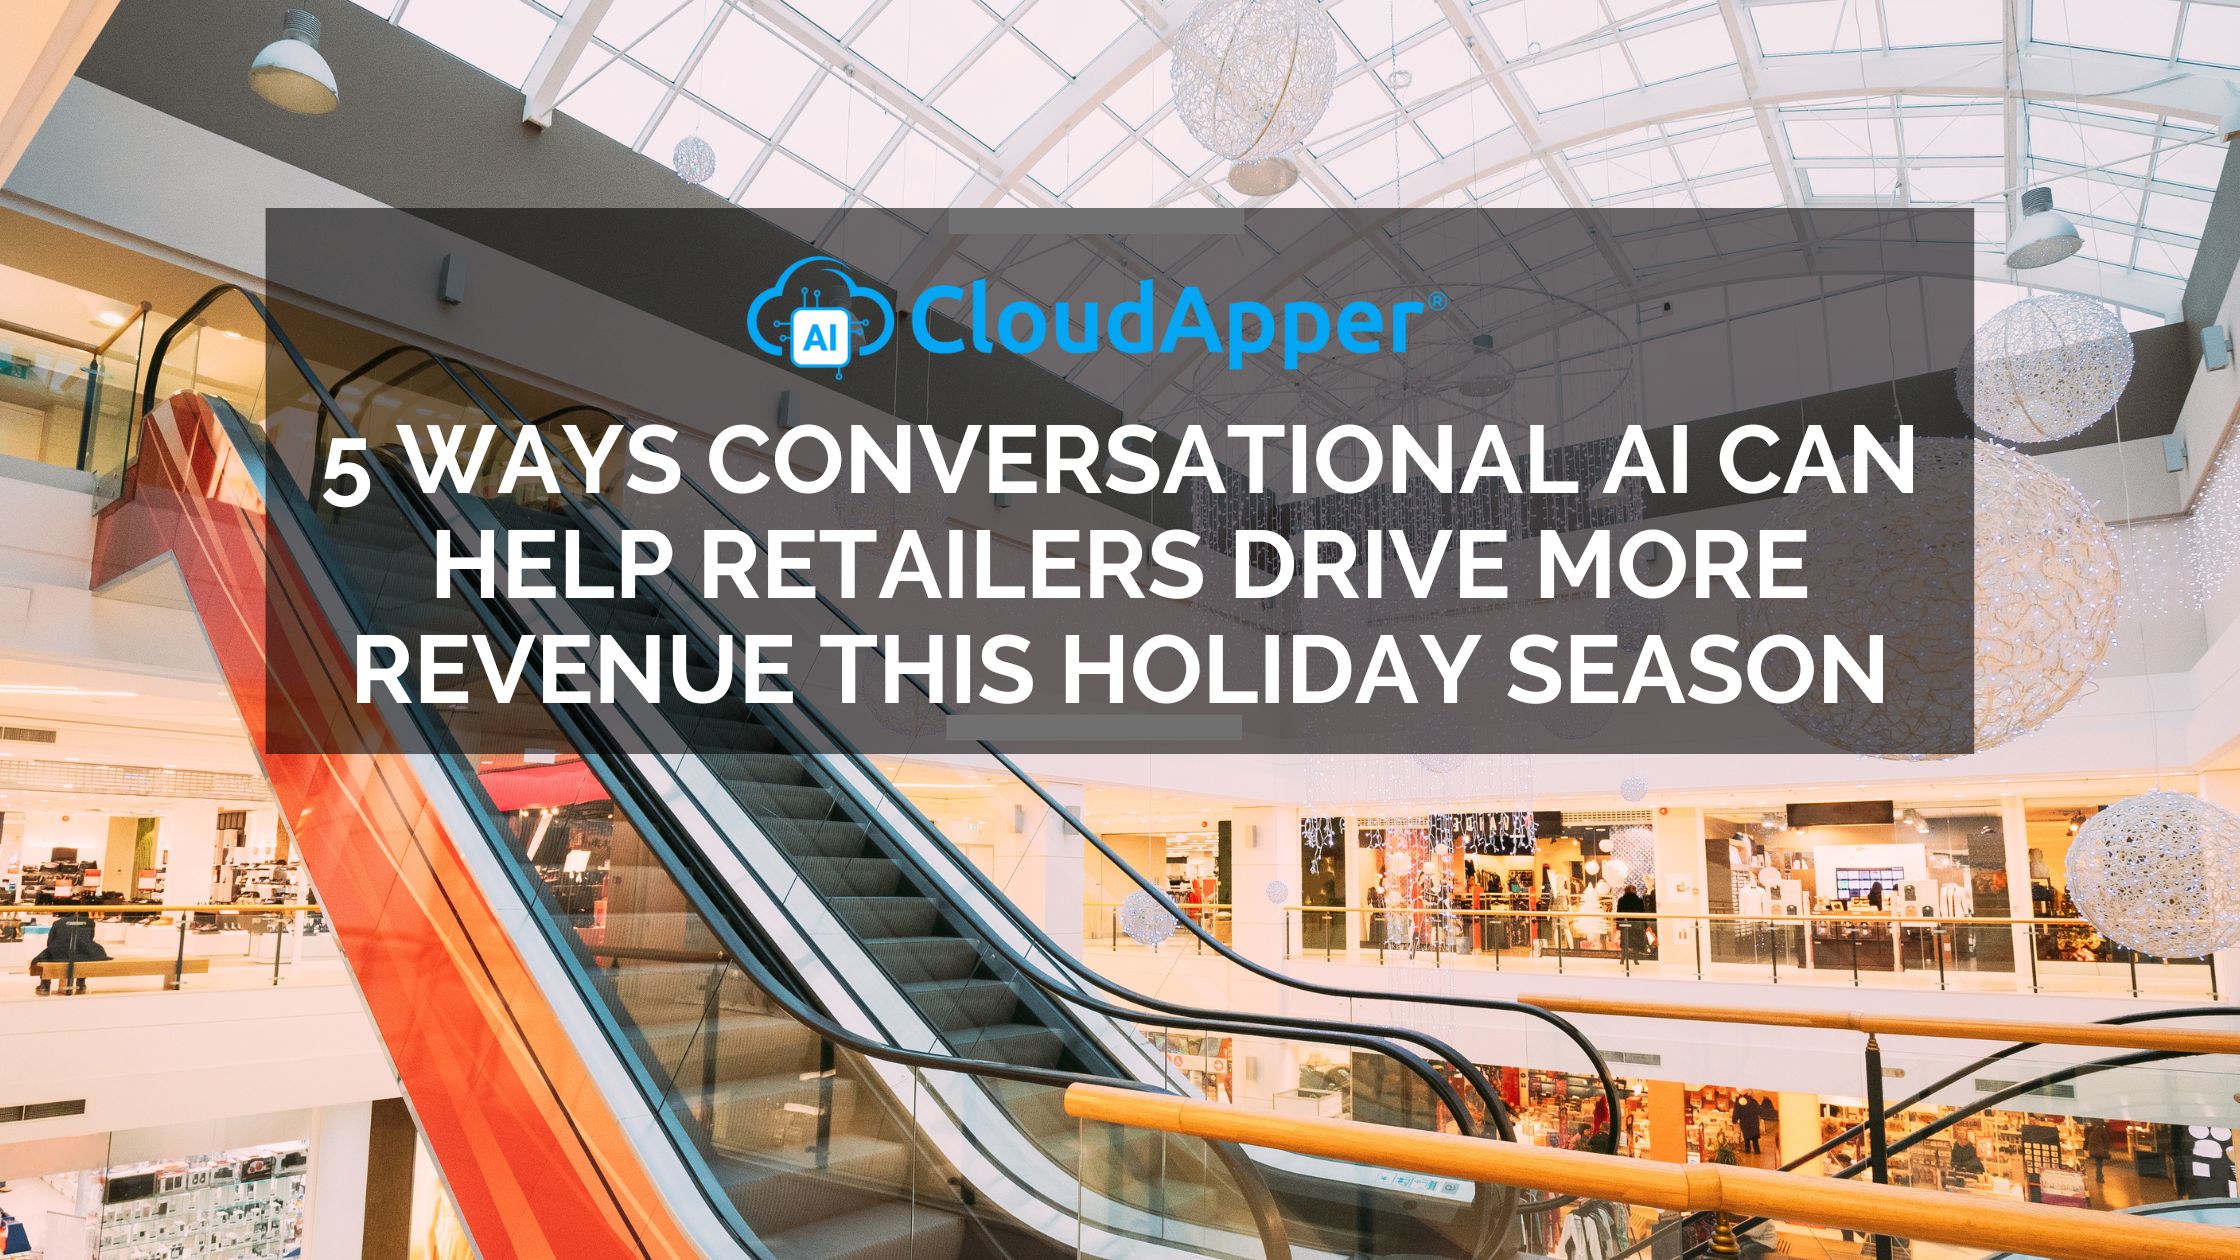 5 Ways Conversational AI Can Help Retailers Drive More Revenue This Holiday Season